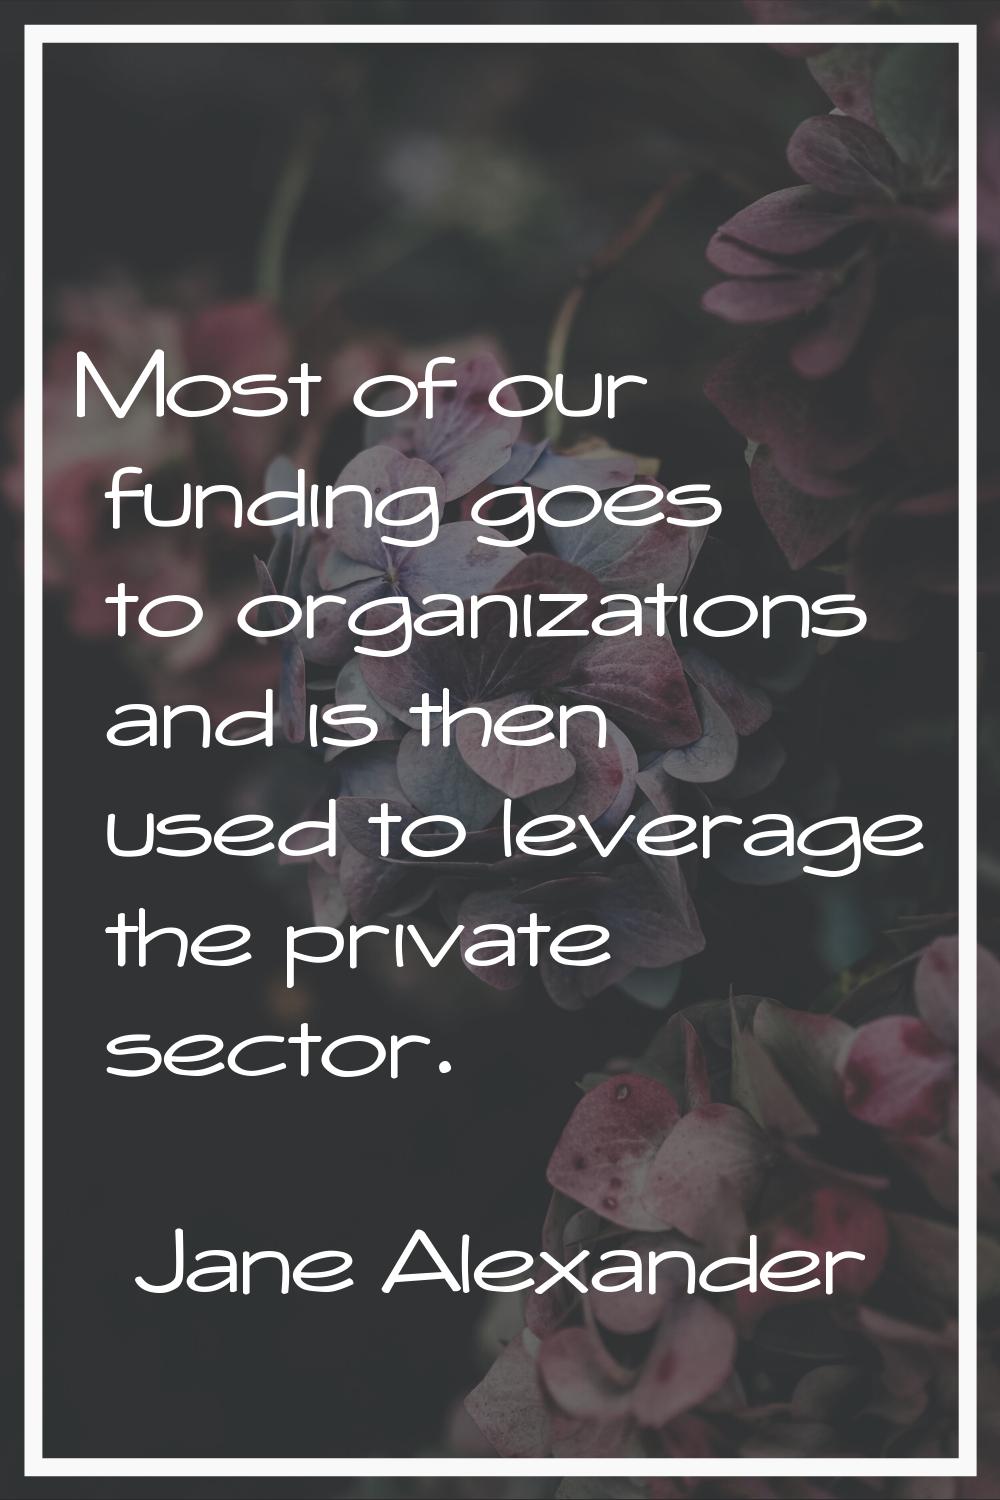 Most of our funding goes to organizations and is then used to leverage the private sector.